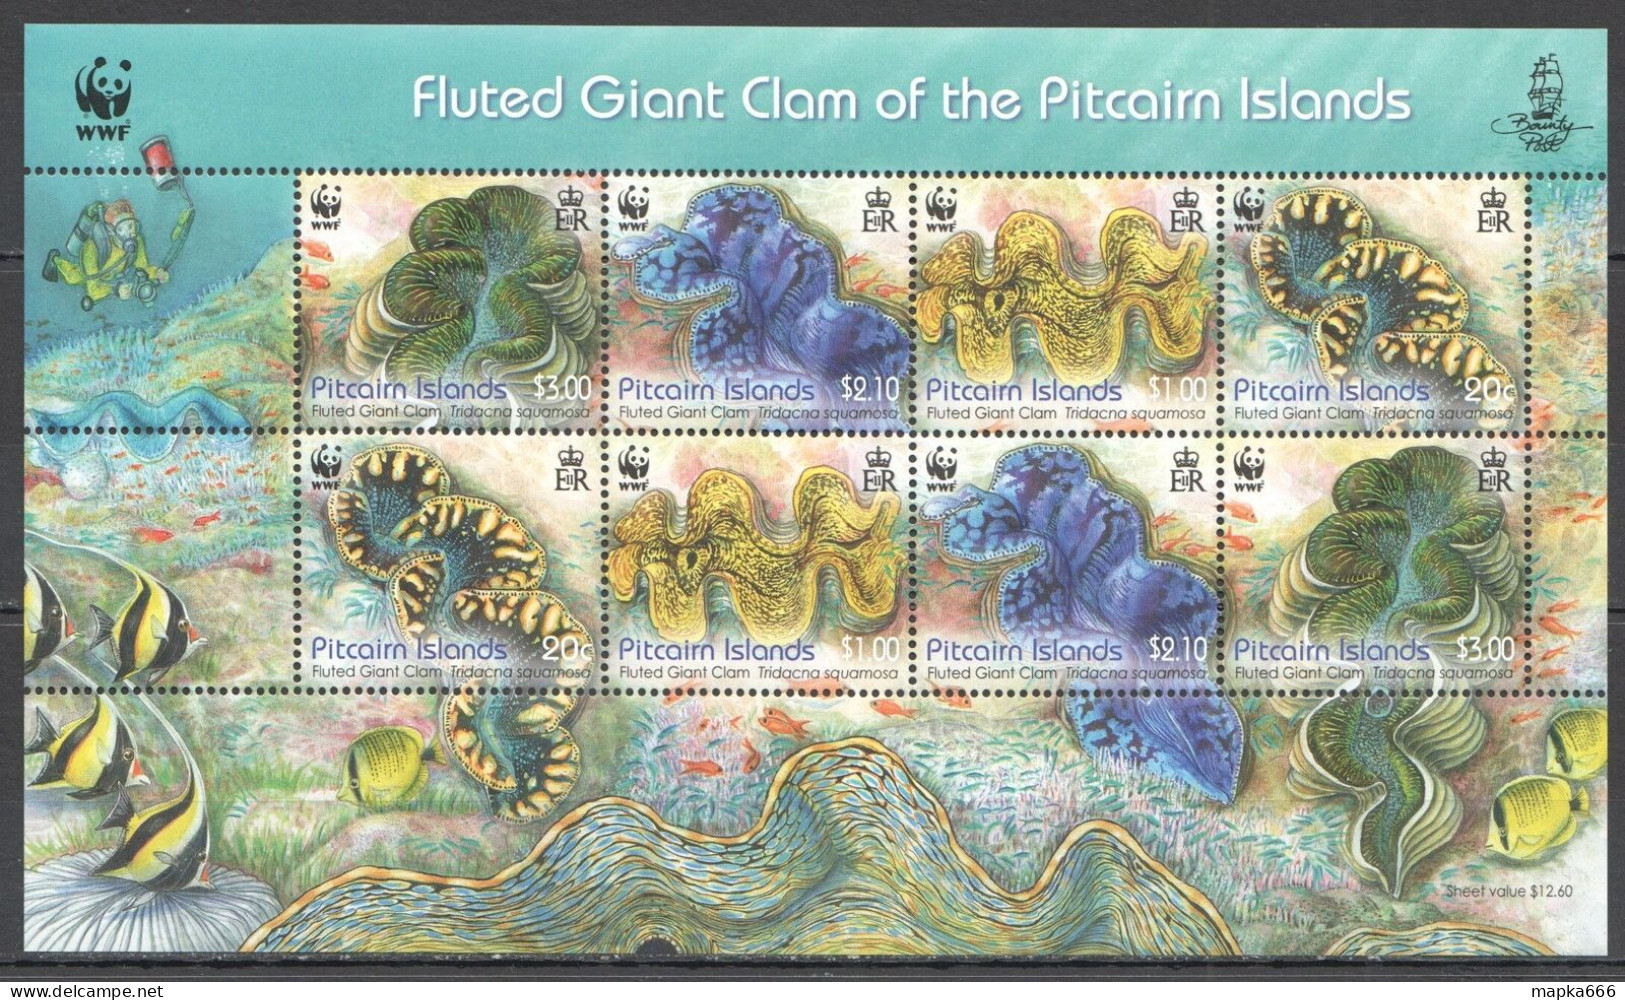 Ft103 2012 Pitcairn Islands Wwf Fluted Giant Clam Michel 25 Euro #865-8 1Kb Mnh - Meereswelt